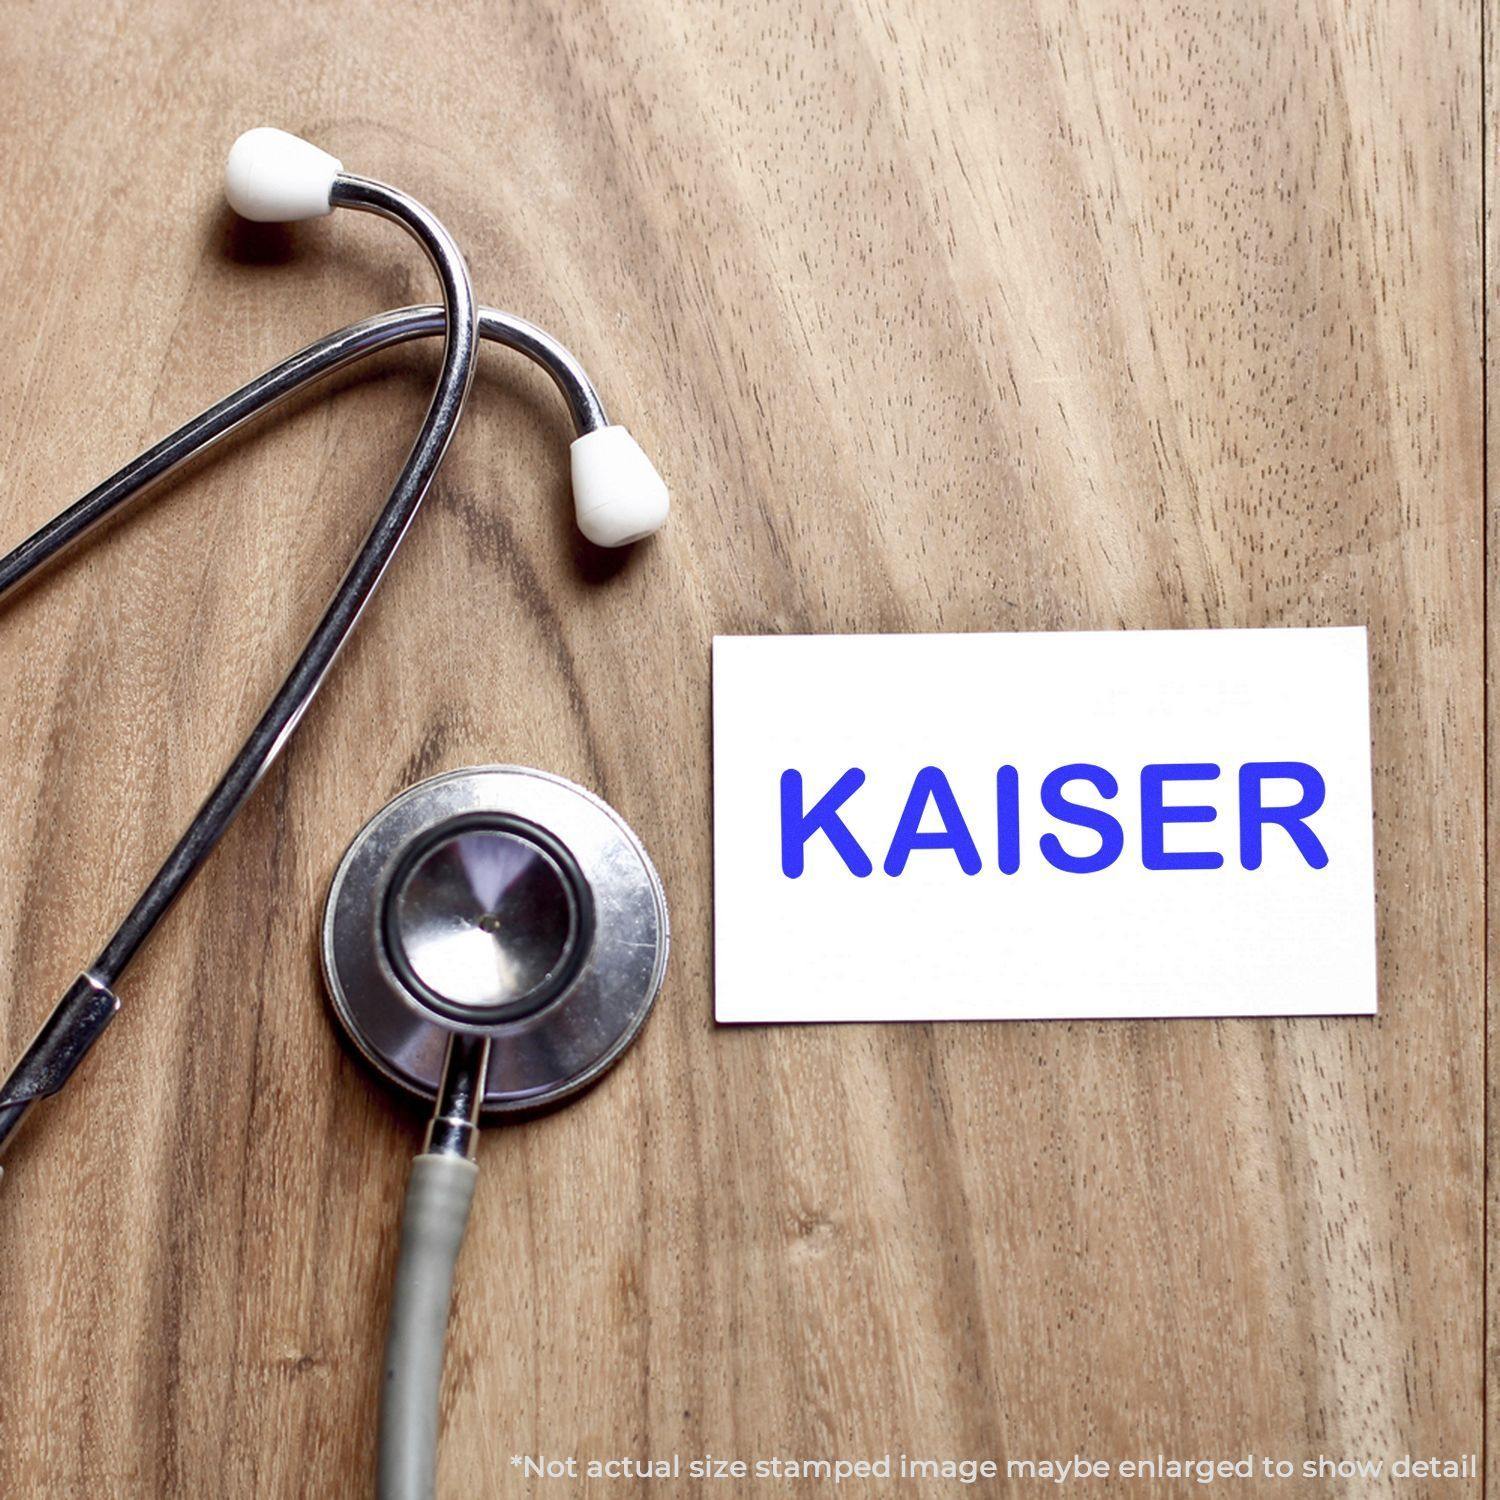 A stock office rubber stamp with a stamped image showing how the text "KAISER" in a large font is displayed after stamping.